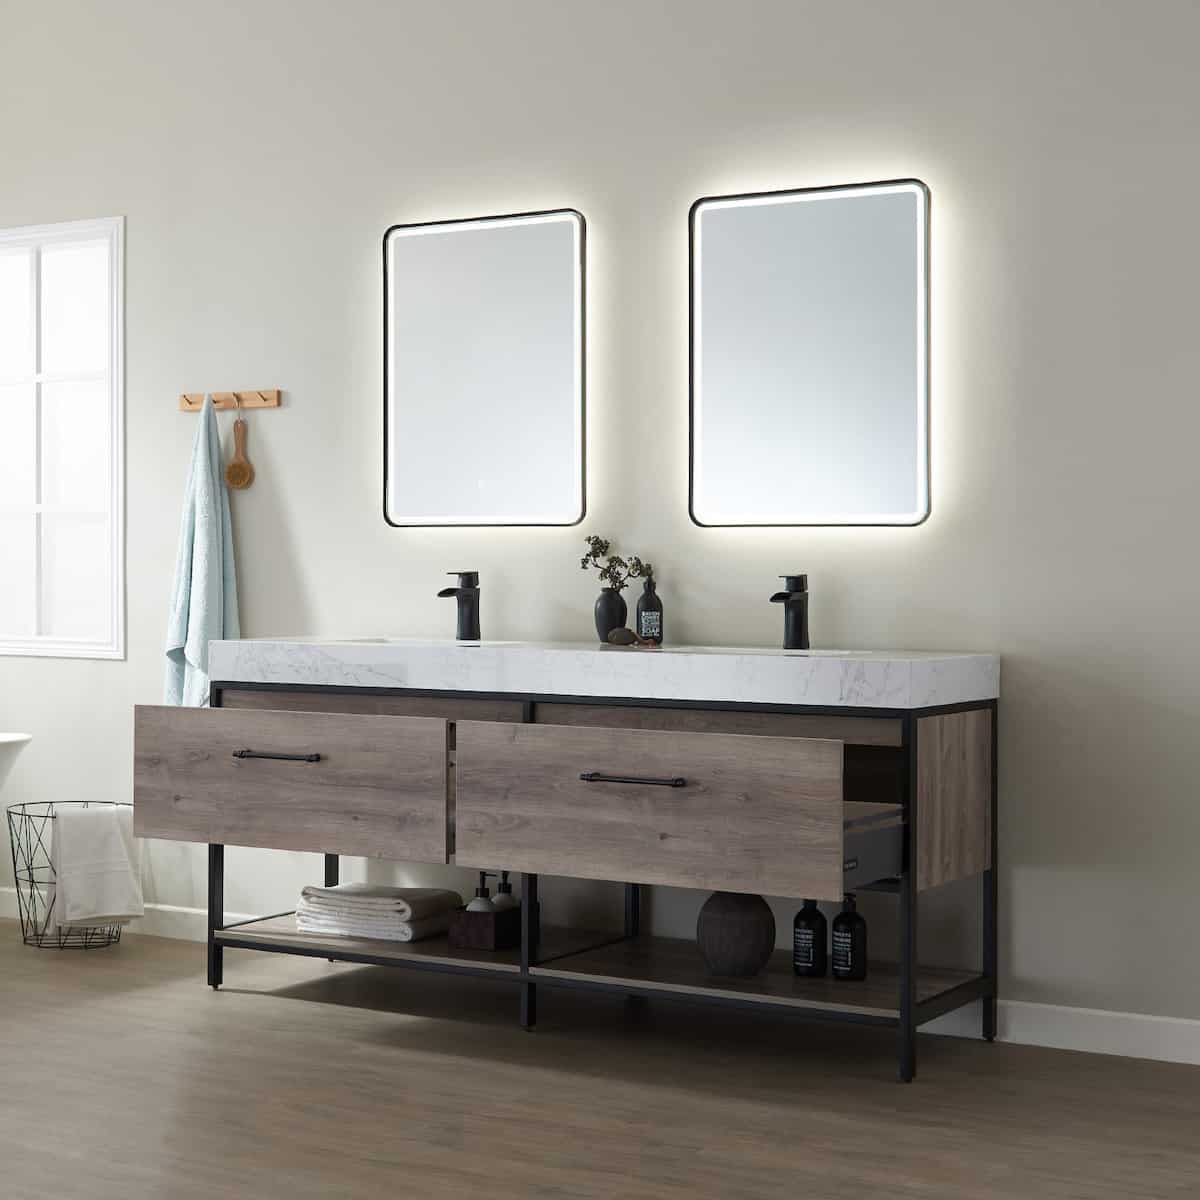 Vinnova Palma 72 Inch Freestanding Double Vanity in Mexican Oak with White Composite Grain Stone Countertop With Mirrors Drawers 701272-MXO-GW